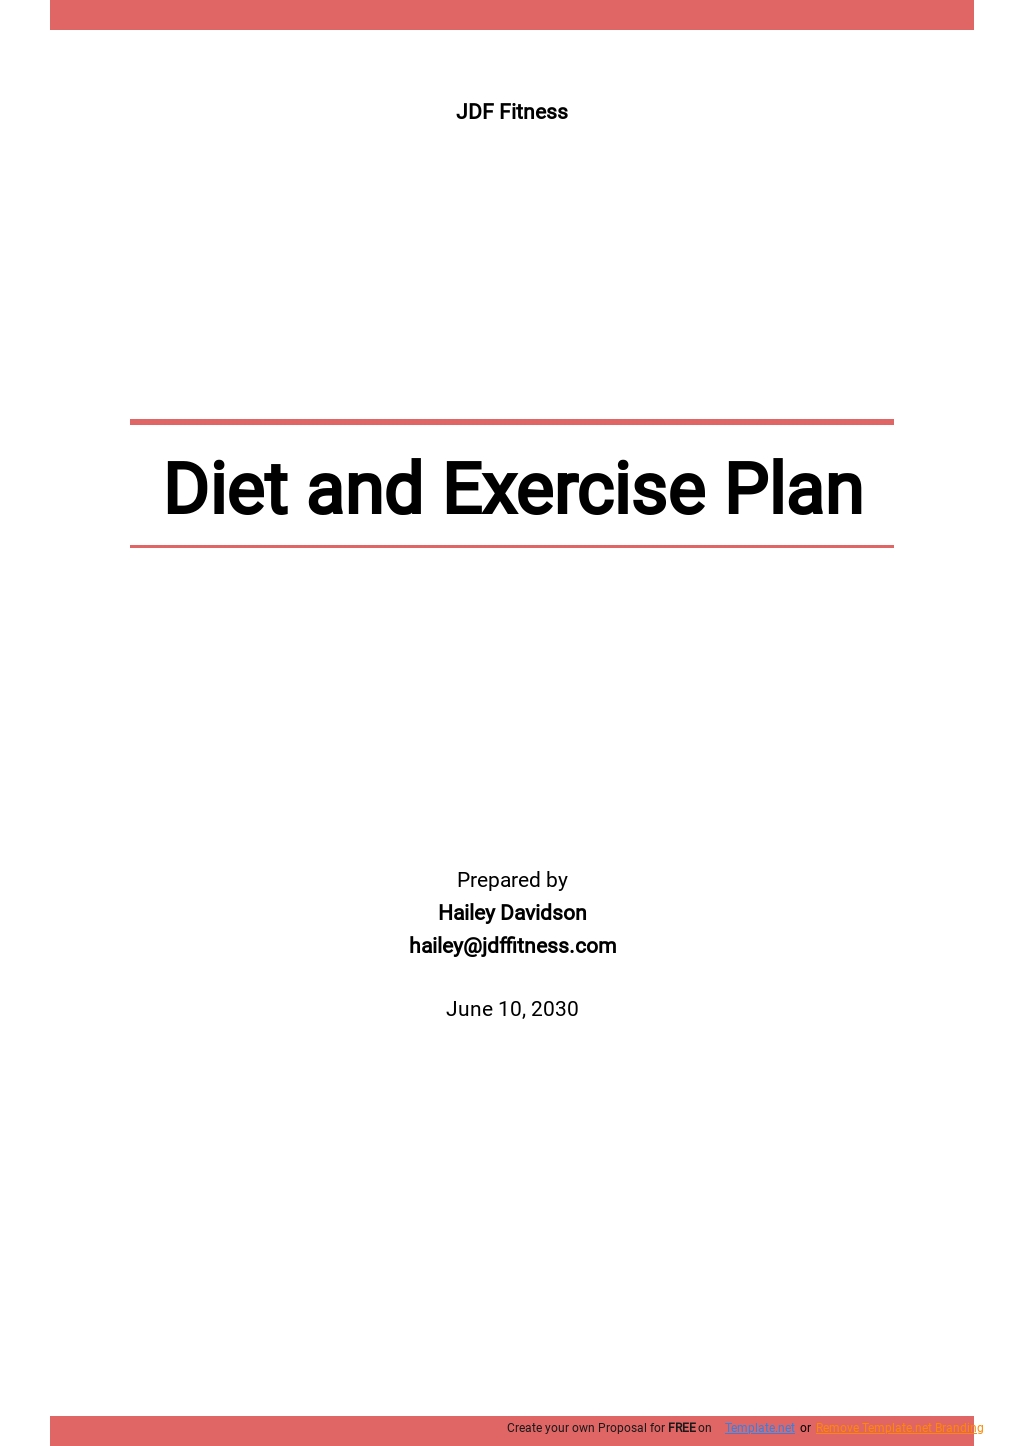 Simple Diet and Exercise Plan Template.jpe